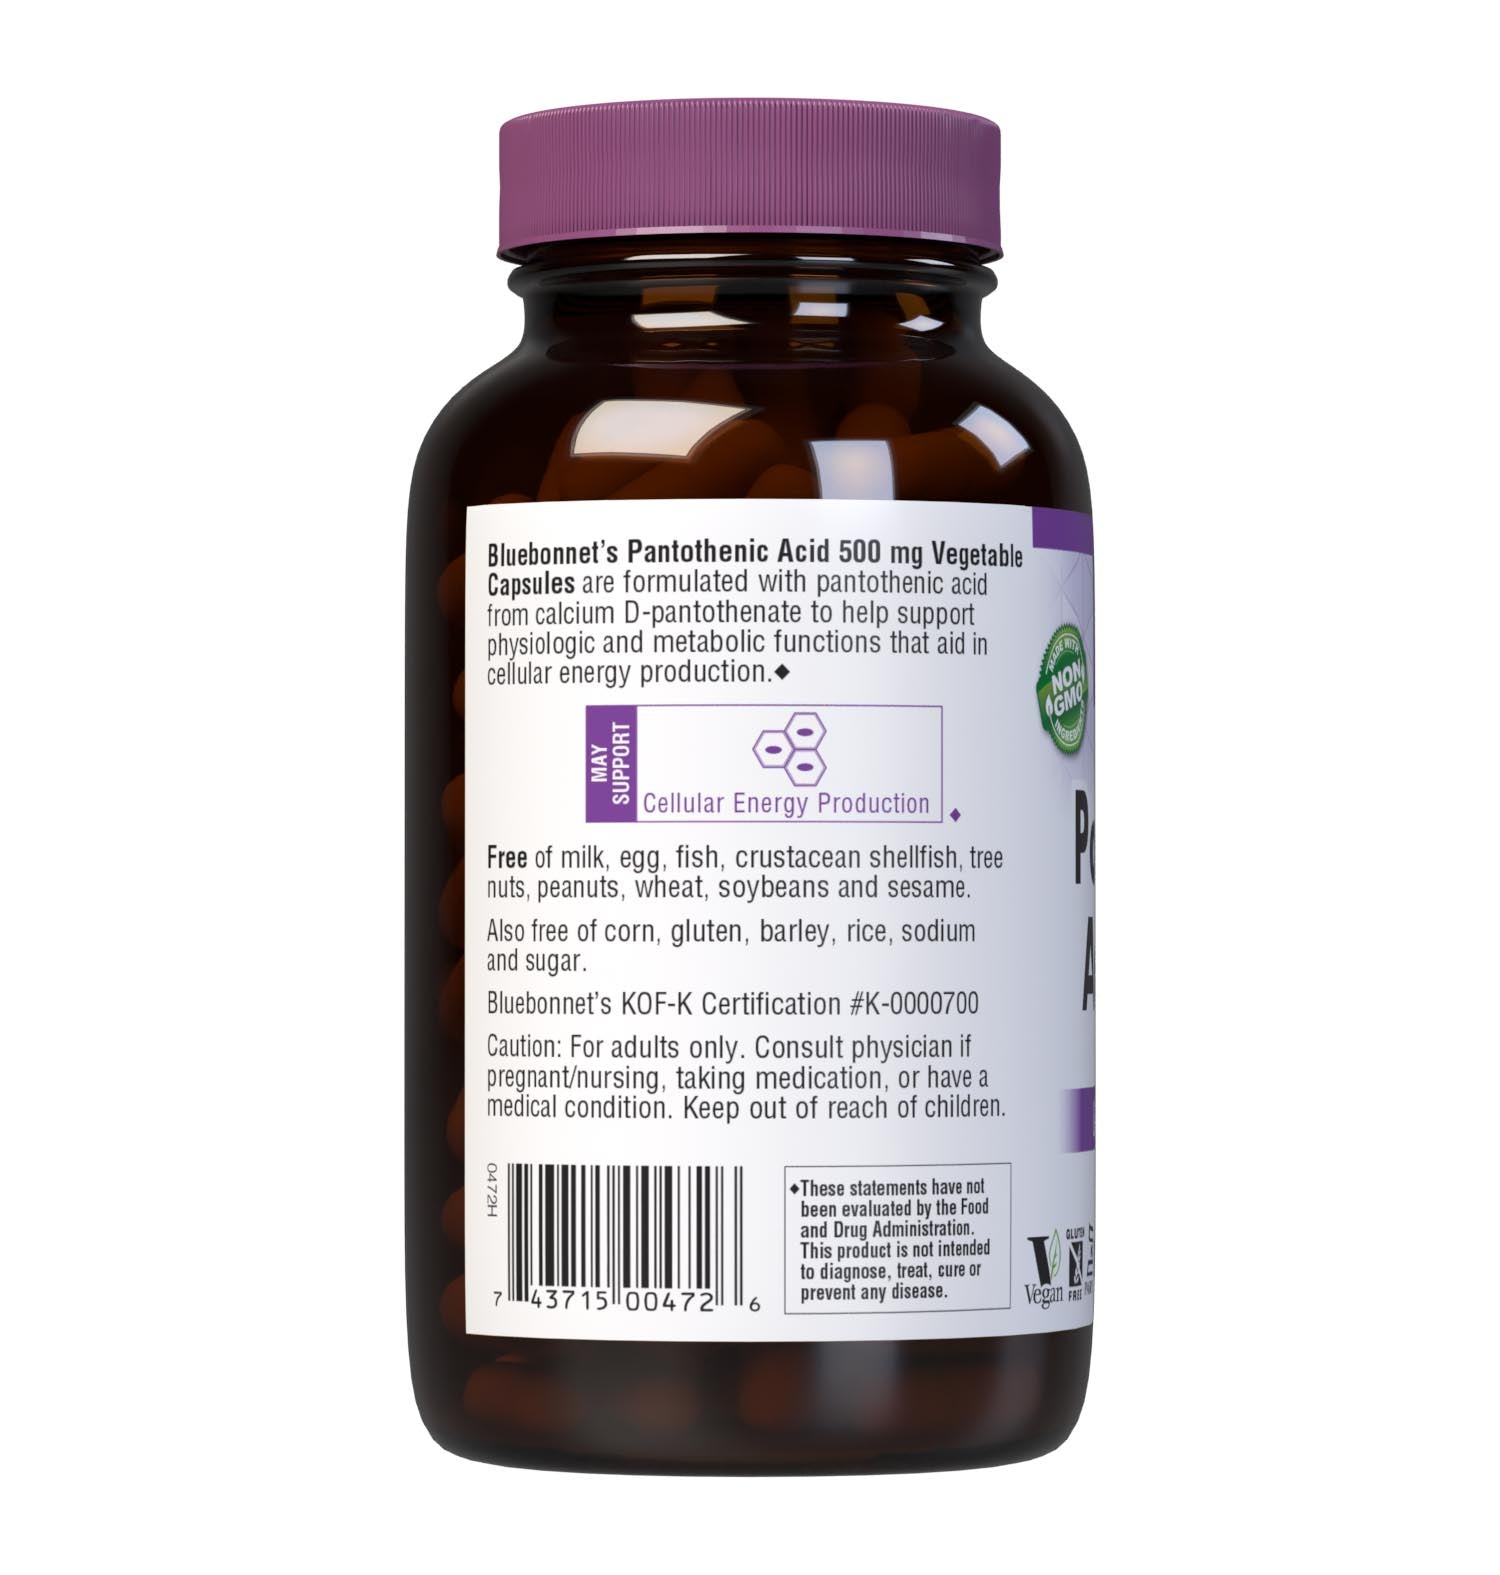 Bluebonnet’s Pantothenic Acid 500 mg 180 Vegetable Capsules are formulated with pantothenic acid from calcium D-pantothenate. Tested for potency and purity in our own state-of-the-art laboratory. Pantothenic acid may support cellular energy production. Supplement facts panel. Description panel. #size_180 count